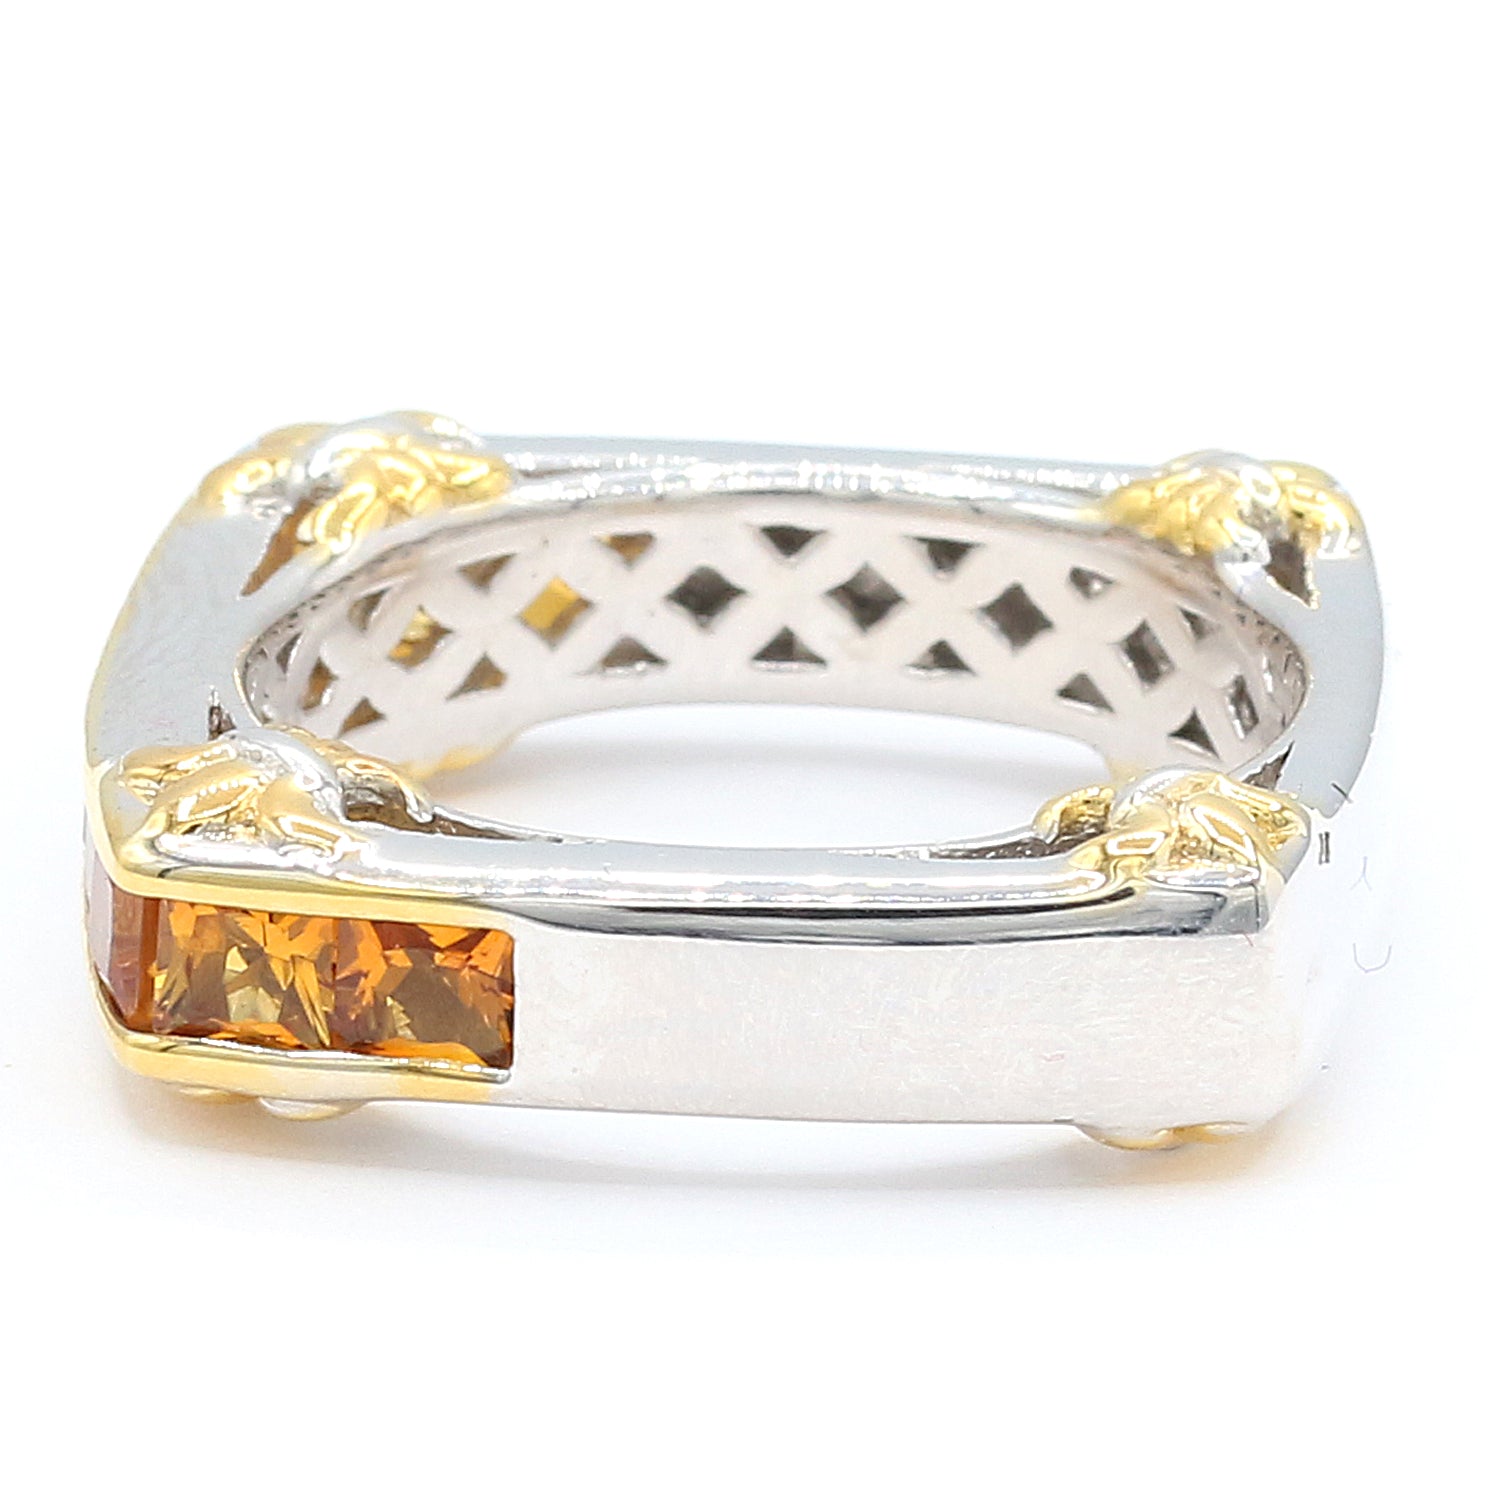 Gems en Vogue 0.90ctw Madeira Citrine Band Ring CANNOT BE RESIZED